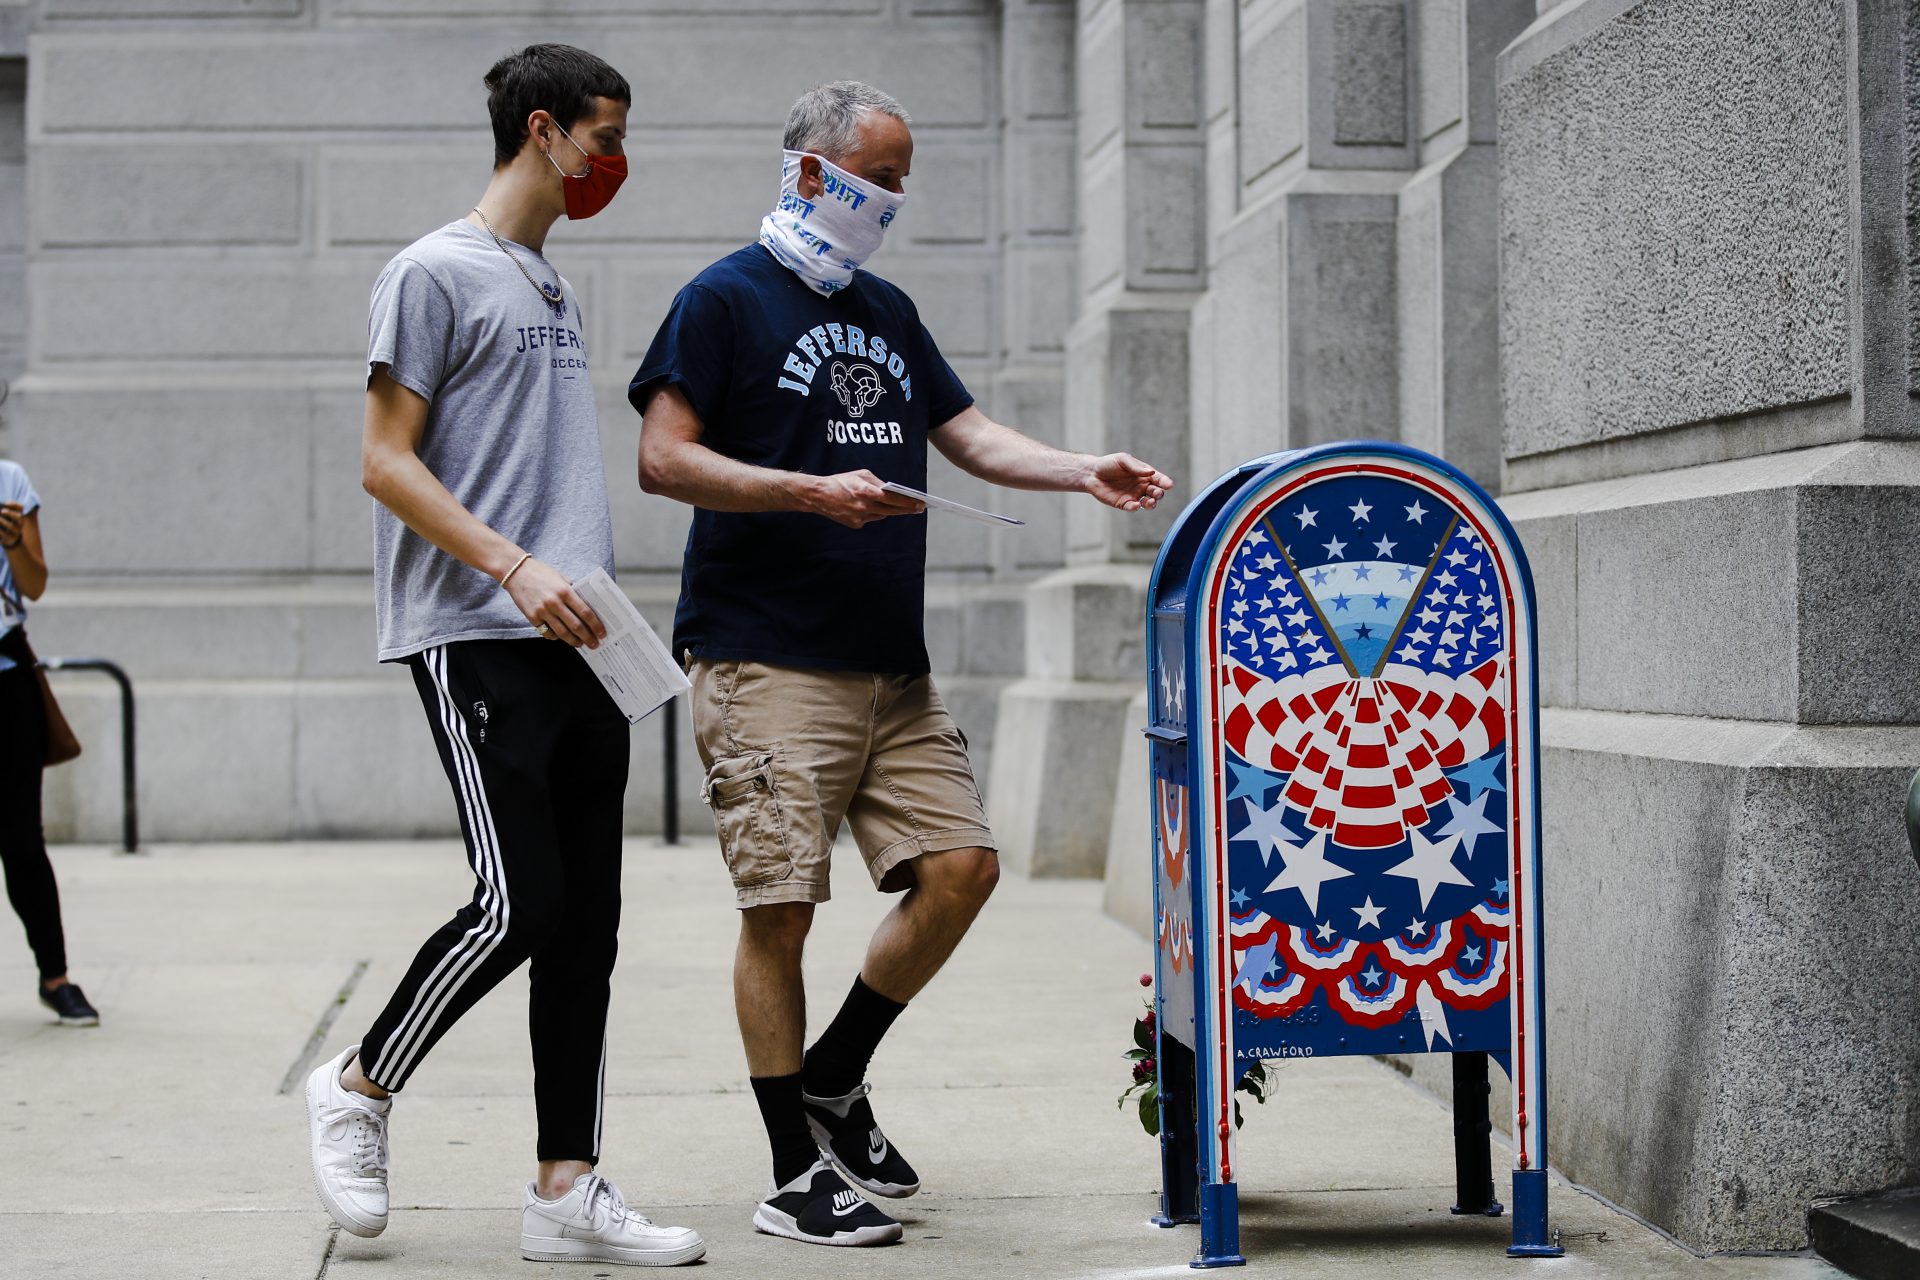 Benjamin Graff, center, and his son Jacob Graff, 19, drop off their mail-in ballots for the Pennsylvania primary election, in Philadelphia, Tuesday, June 2, 2020. (AP Photo/Matt Rourke)